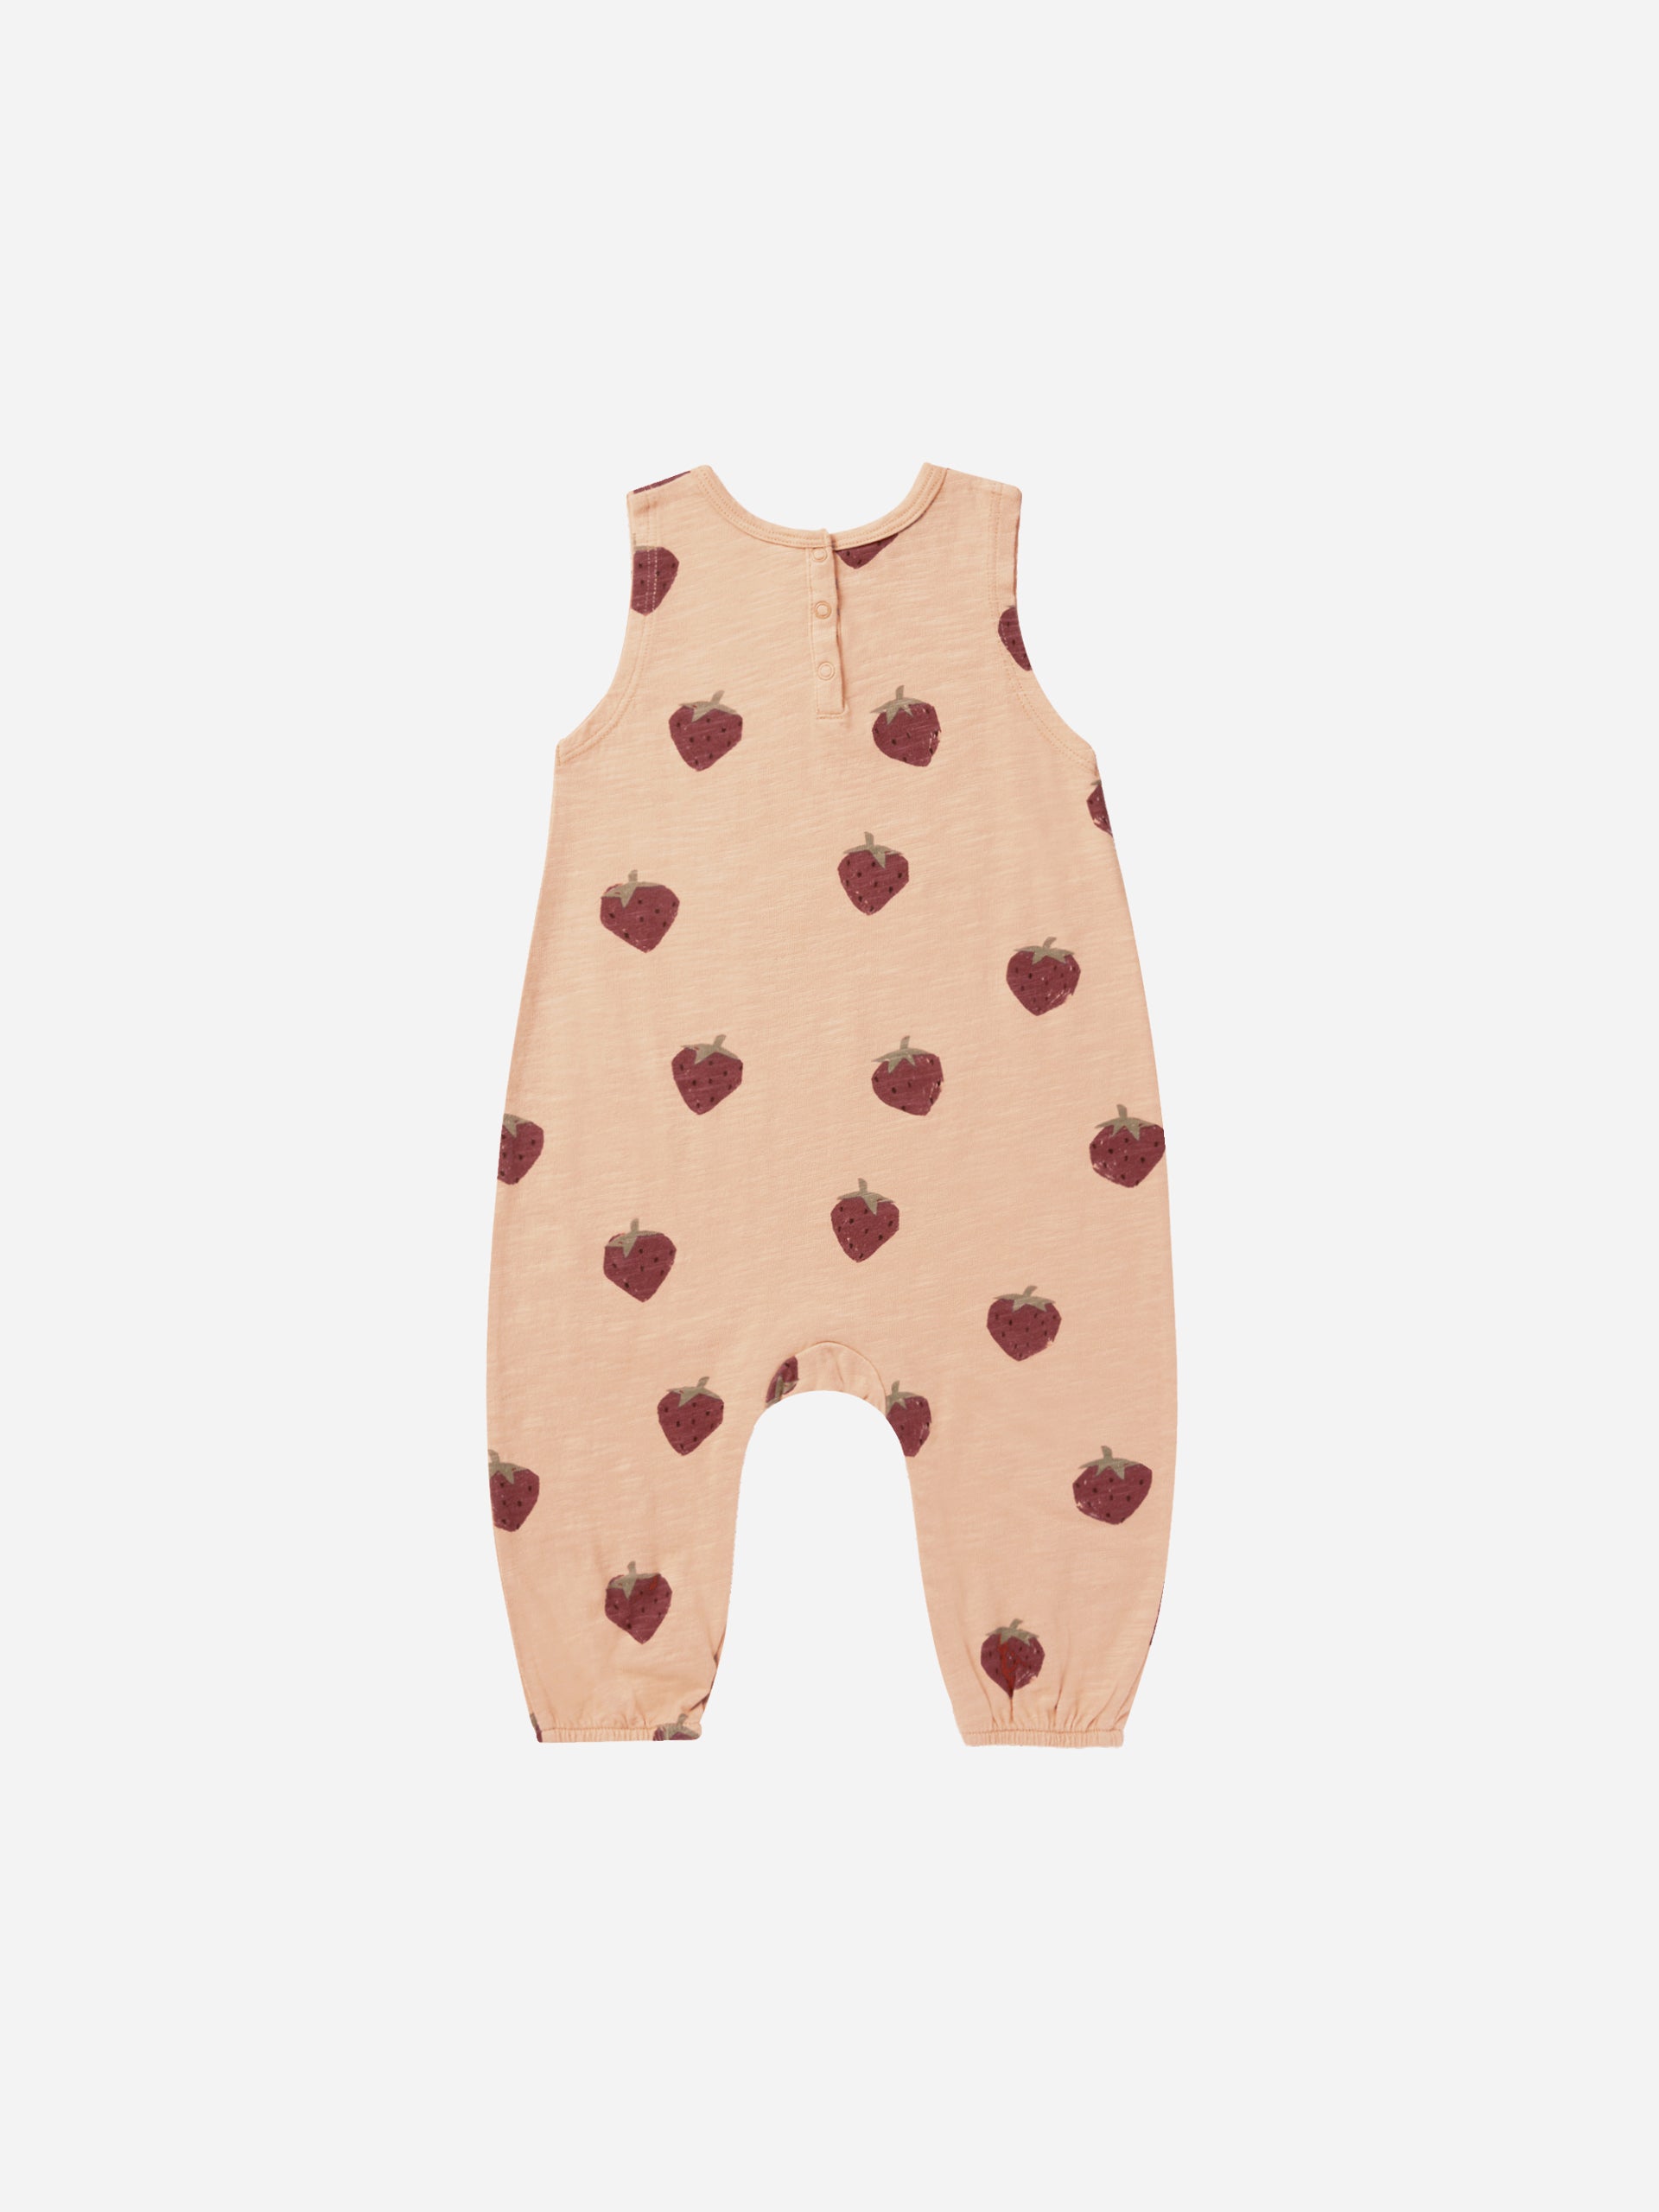 Mills Jumpsuit || Strawberries - Rylee + Cru | Kids Clothes | Trendy Baby Clothes | Modern Infant Outfits |